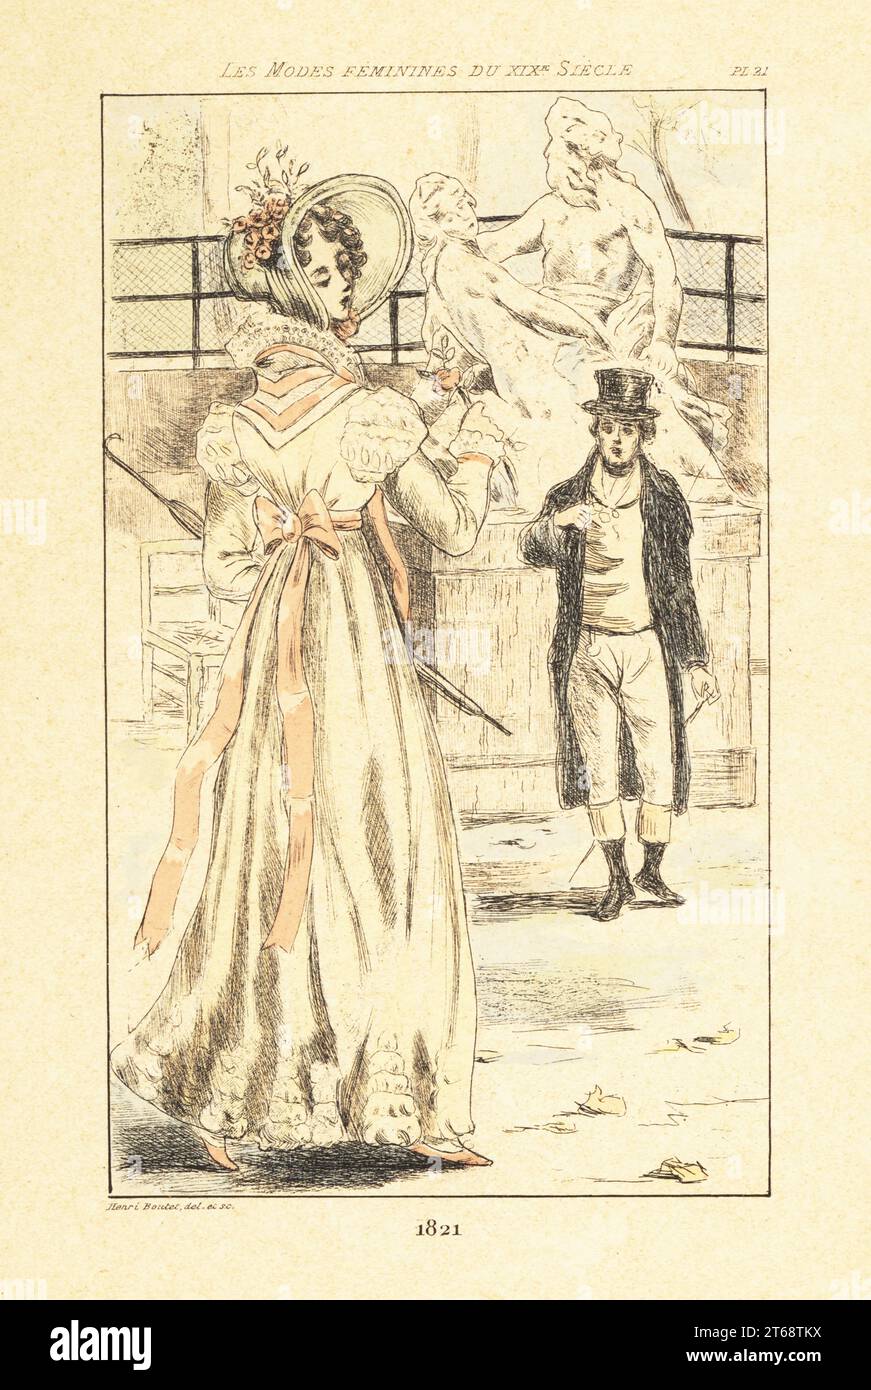 Fashionable woman in front of the marble sculpture Seine and Marne by Nicolas Coustou, Tuileries Gardens, Paris, 1821. She wears a bonnet, high-waisted dress with ruff collar and epaulettes, and holds a rose. Handcoloured drypoint or pointe-seche etching by Henri Boutet from Les Modes Feminines du XIXeme Siecle (Female Fashions of the 19th Century), Ernest Flammarion, Paris, 1902. Boutet (1851-1919) was a French artist, engraver, lithographer and designer. Stock Photo